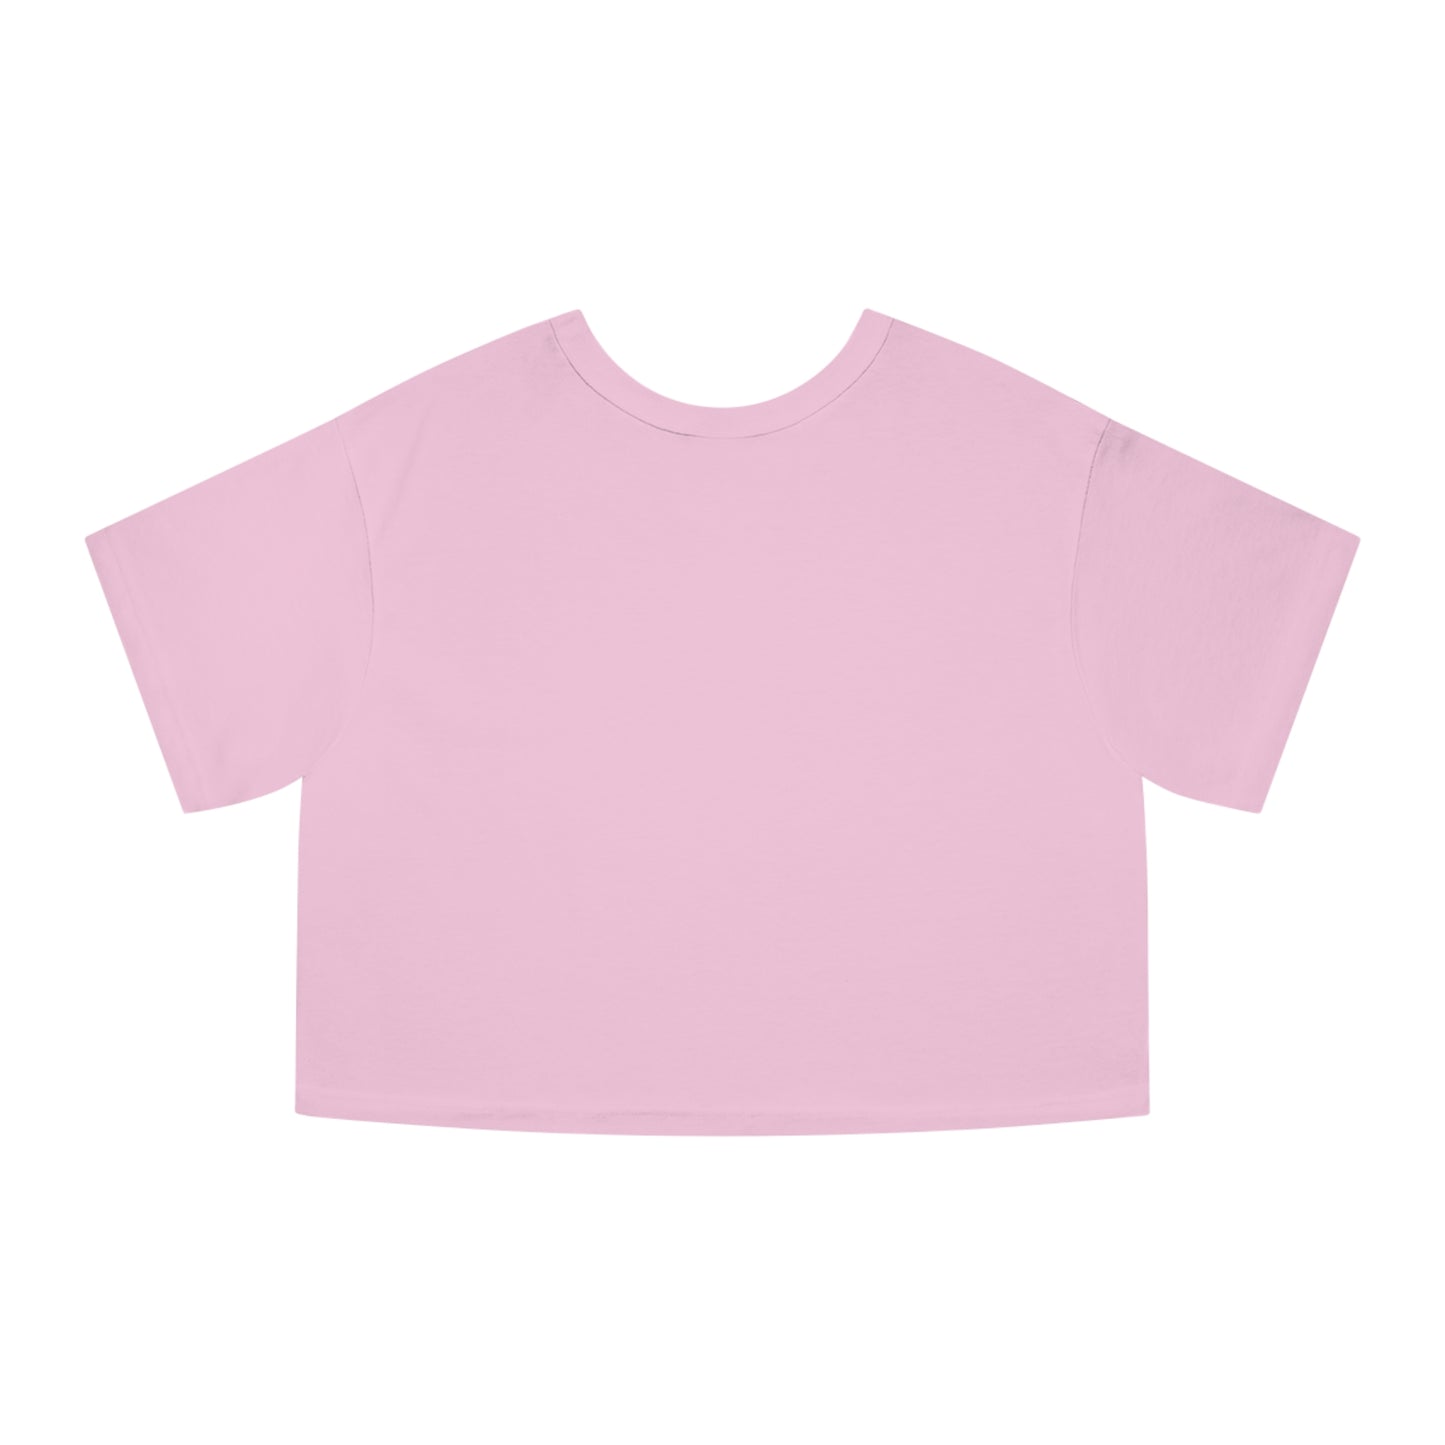 Perspective is Everything: Pink | Champion Women's Heritage Cropped T-Shirt